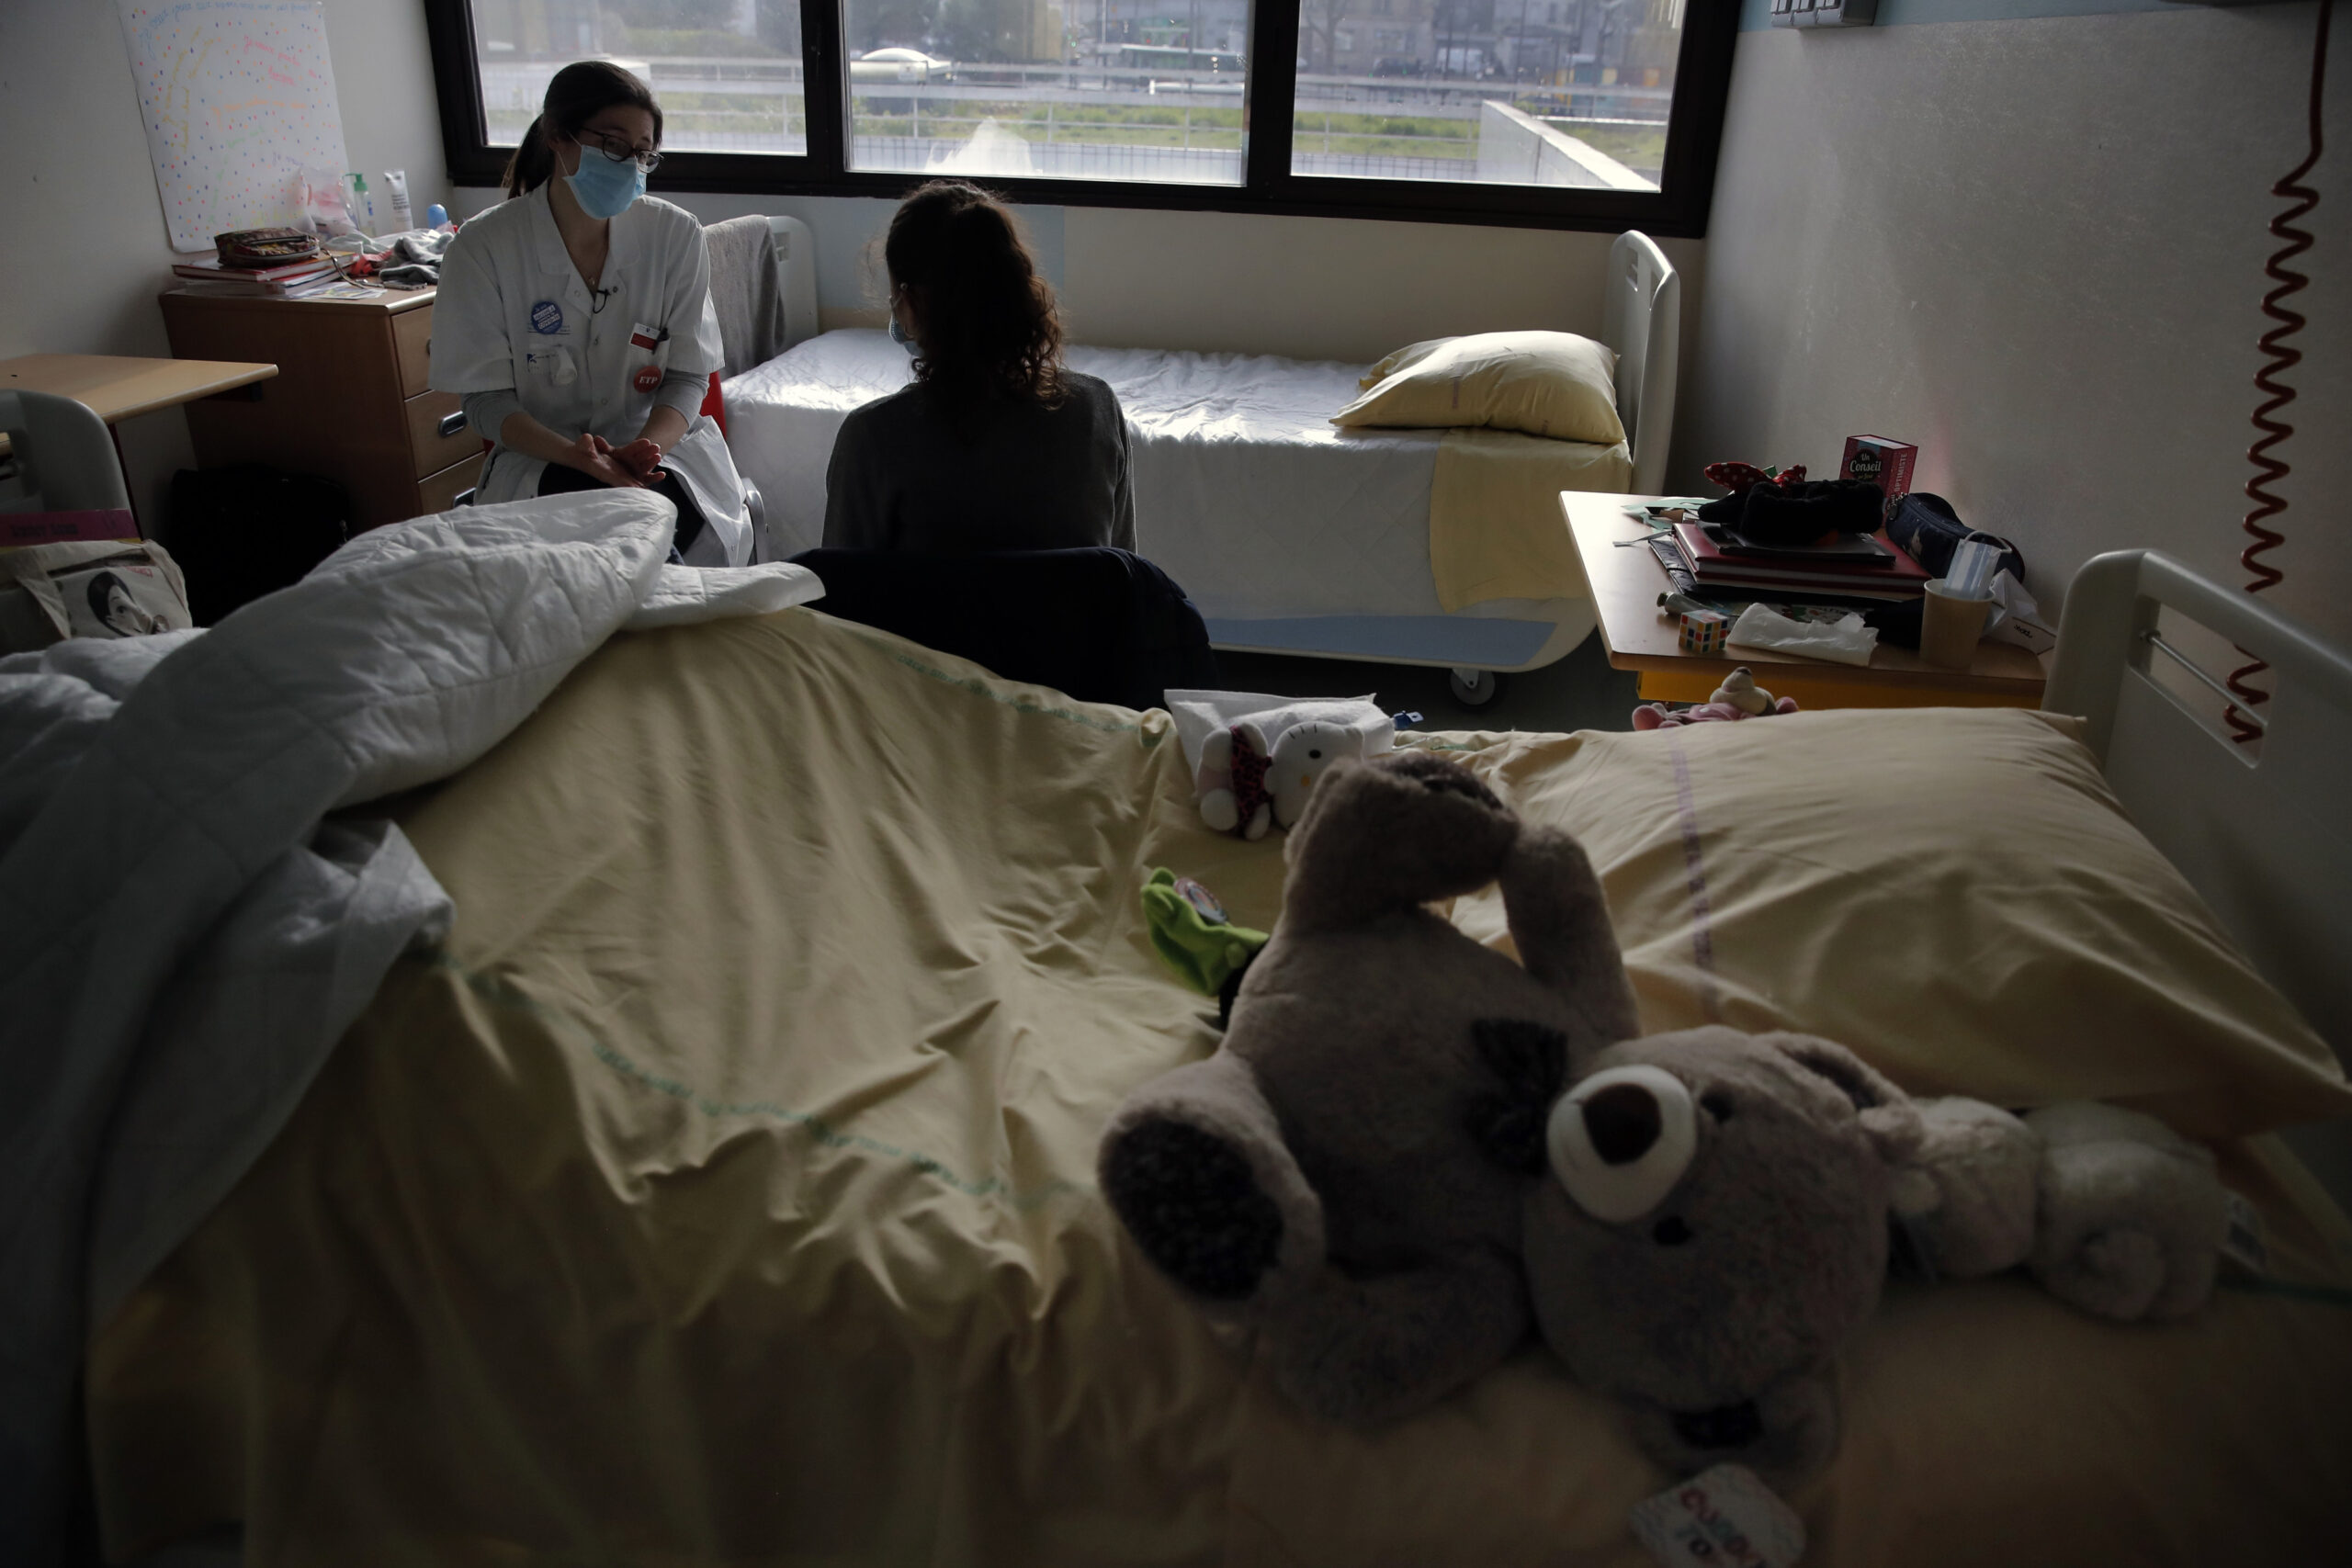 Psychiatrist Coline Stordeur speaks with a young girl in her hospital room.